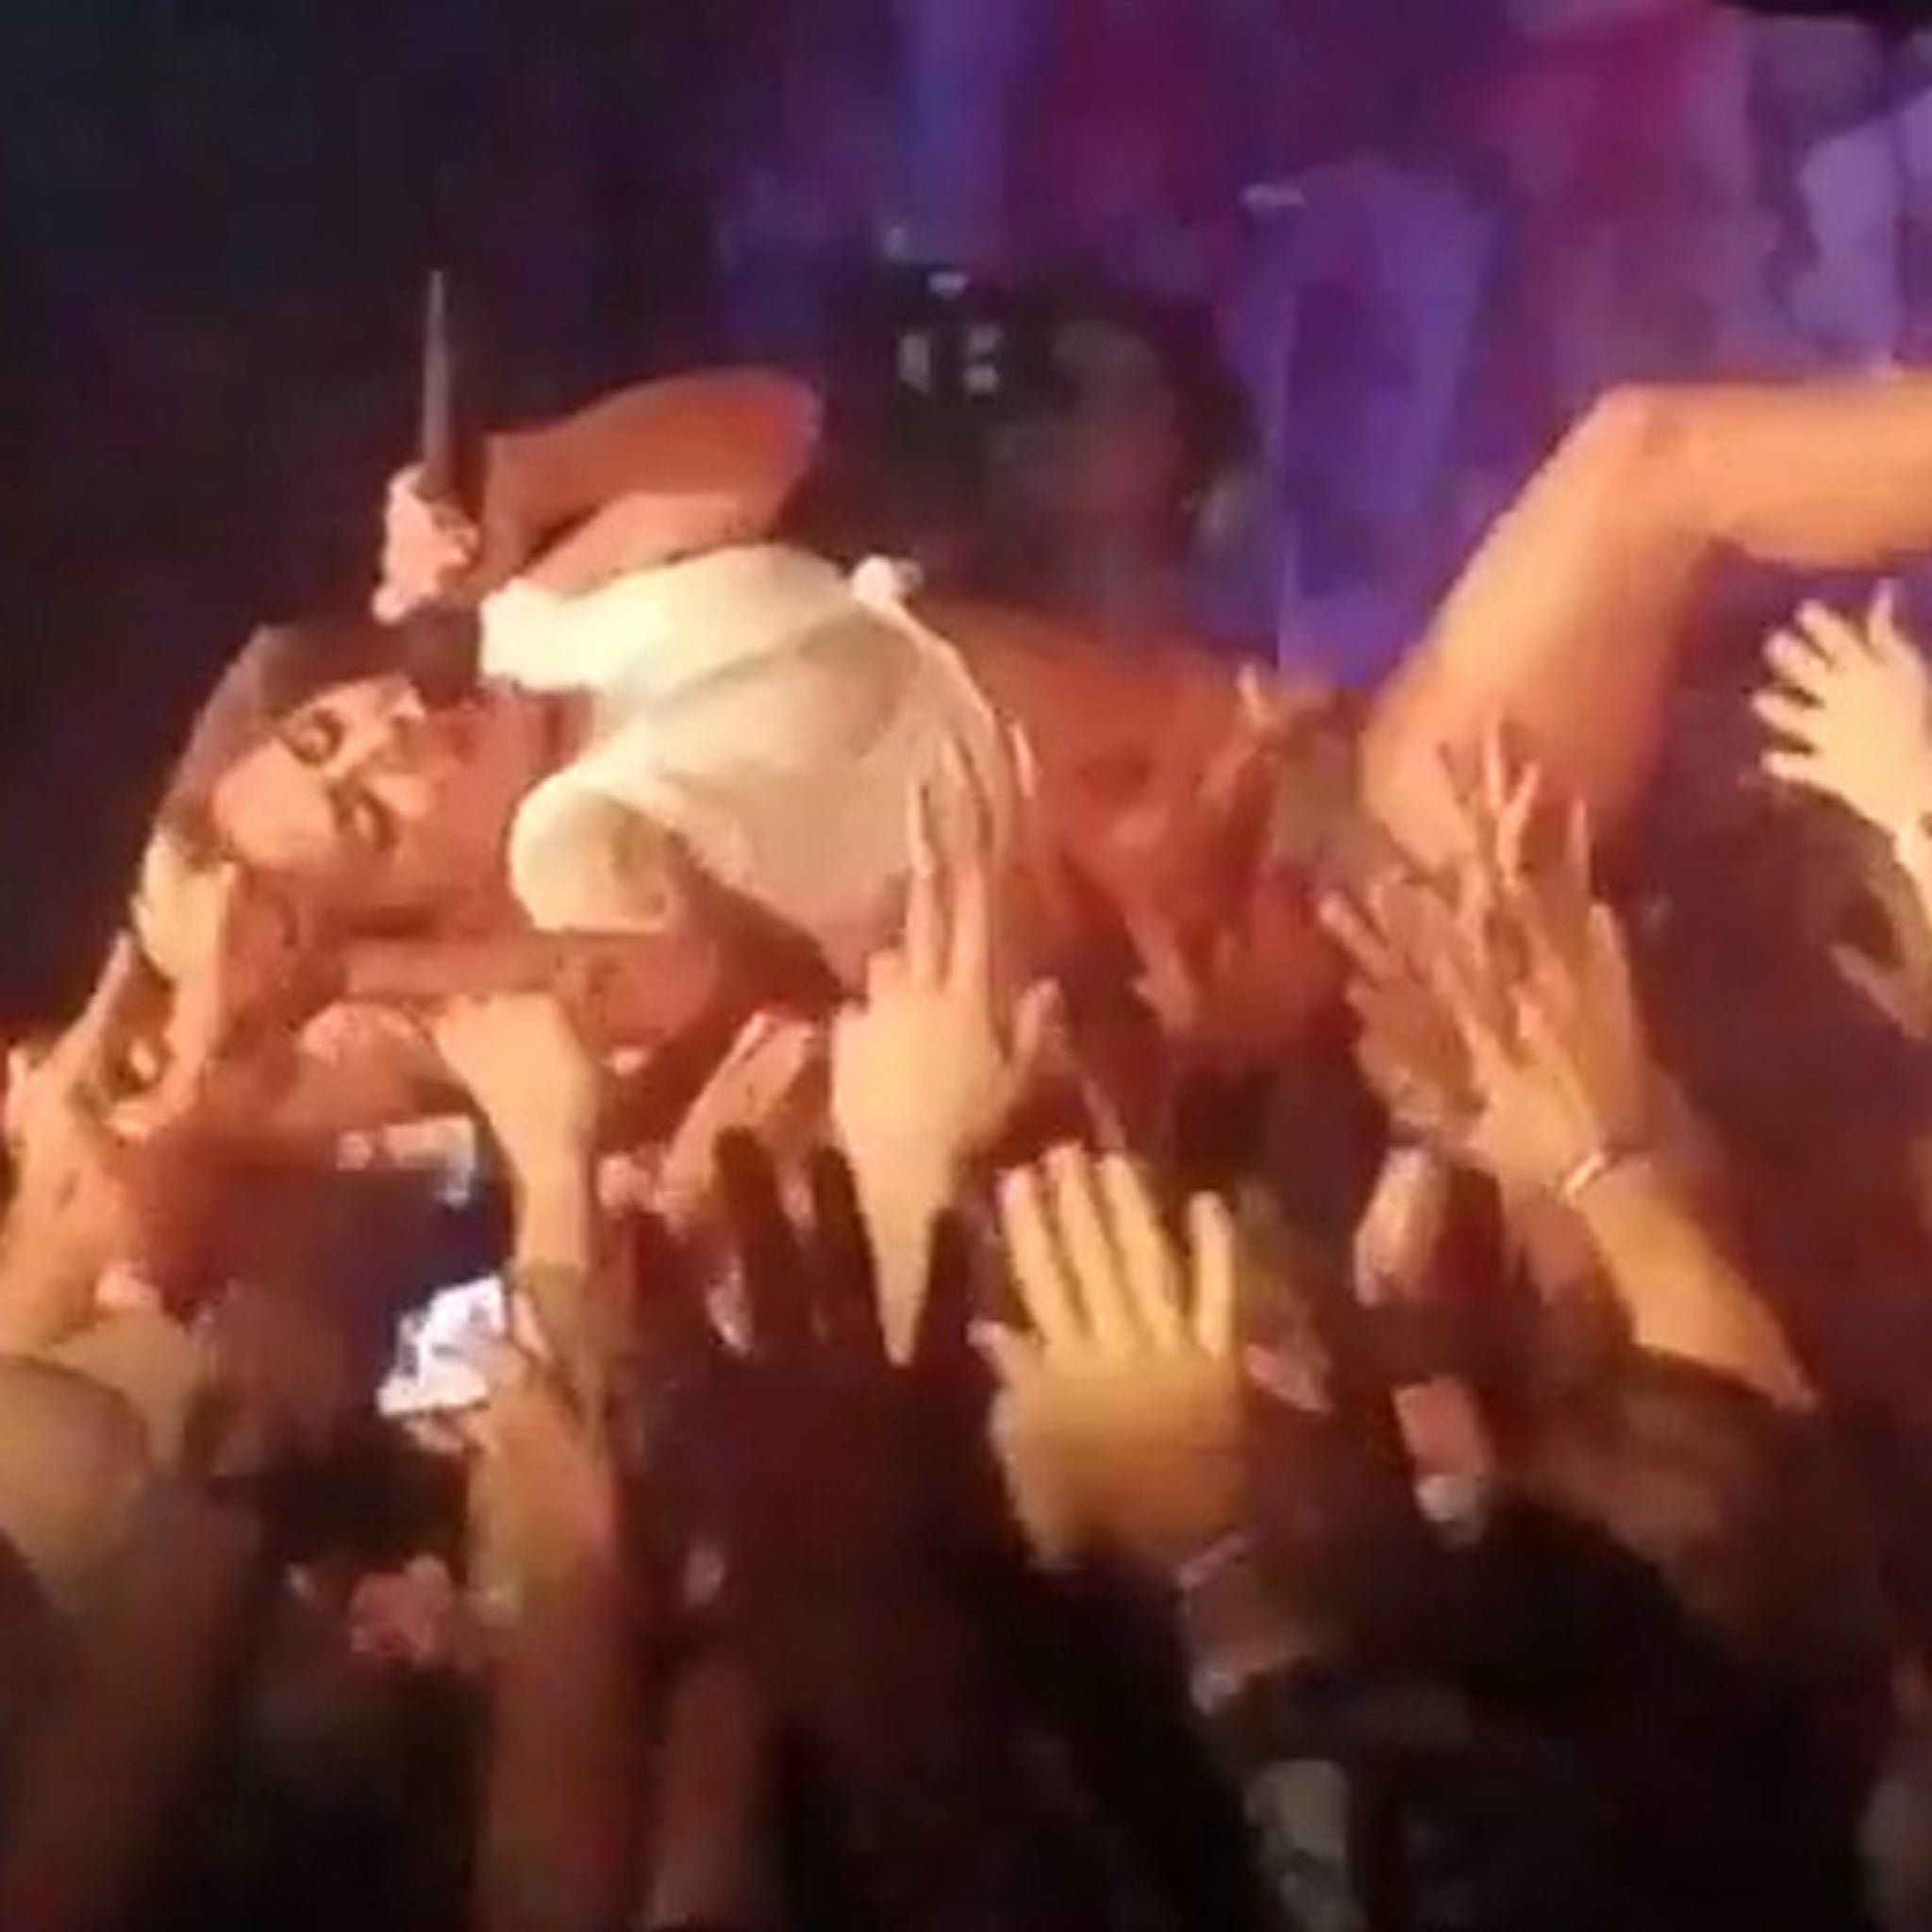 Nude crowd surfing